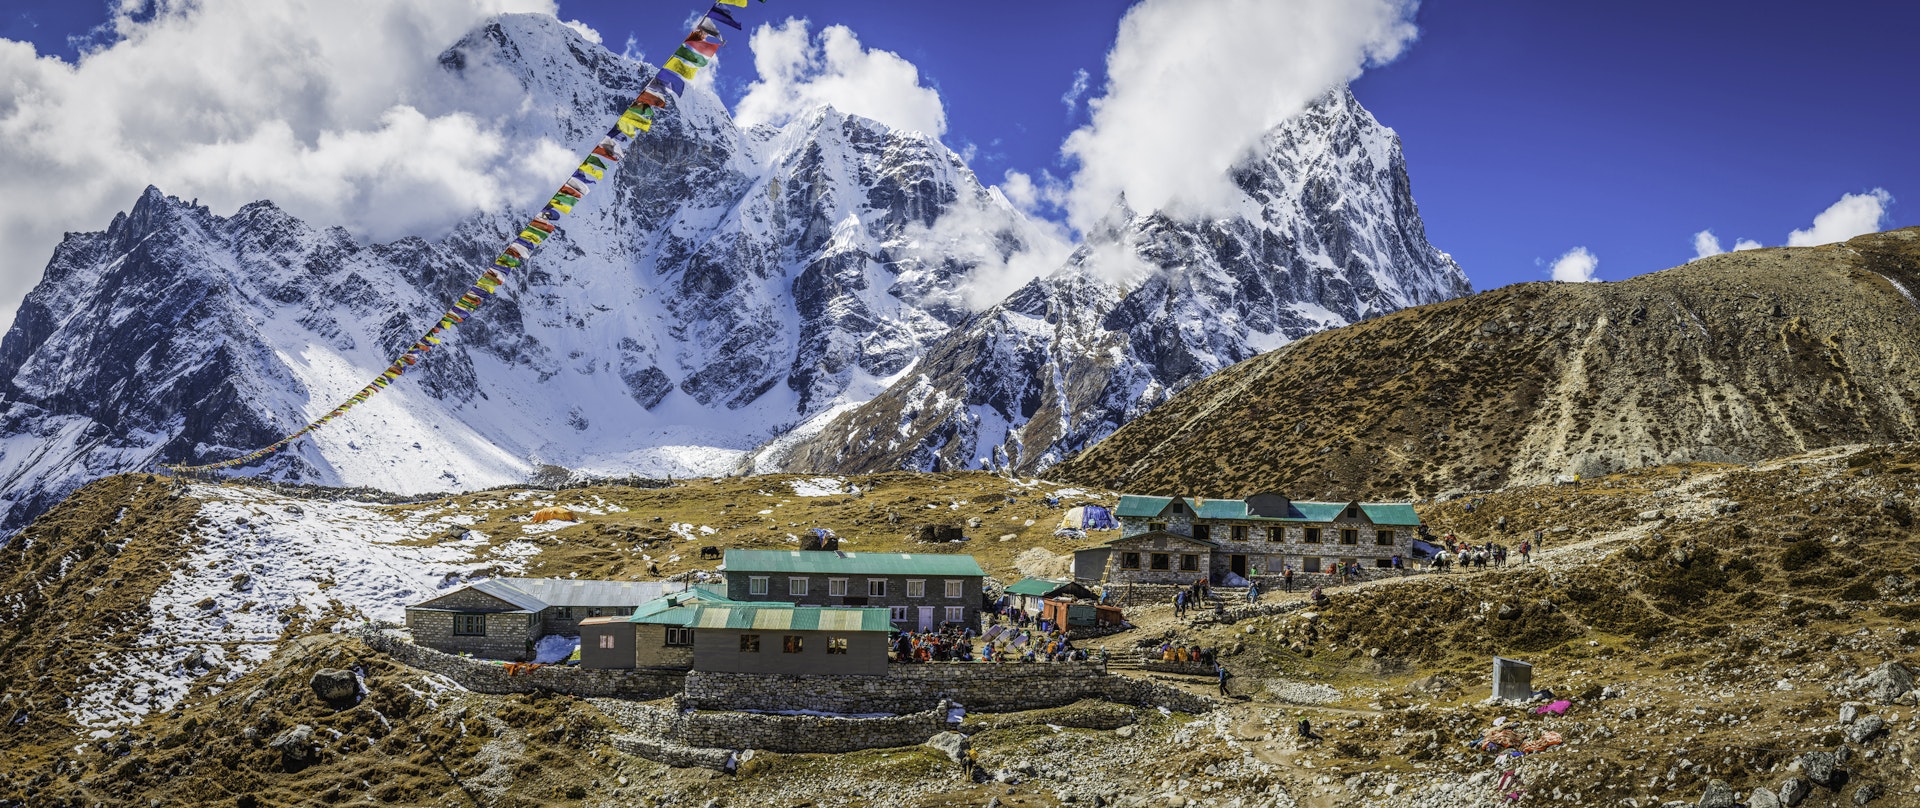 Crowds gather outside traditional teahouses (lodgings) on the trail to Everest Base Camp with colorful flags fluttering in the breeze